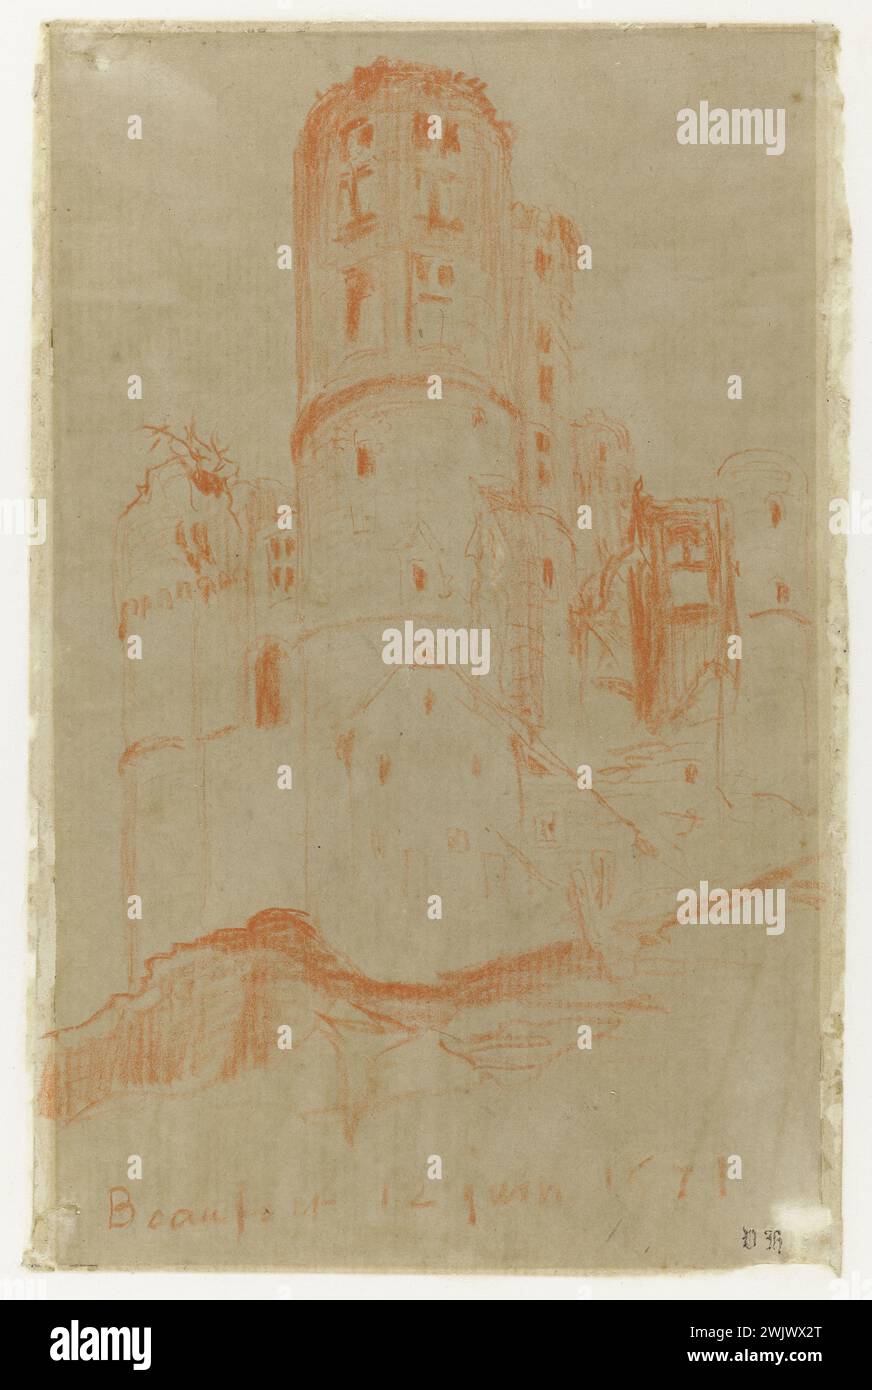 Victor Hugo (1802-1885). 'Beaufort'. Red pencil. 1871. Paris, house of Victor Hugo. 60600-7 Chateau-Fort, MEDIEVALE CONSTRUCTION, Red-colored pencil, drawing, tower, view in counter-the-line, 19th XIXth 19th 19th 19th 19th century Stock Photo